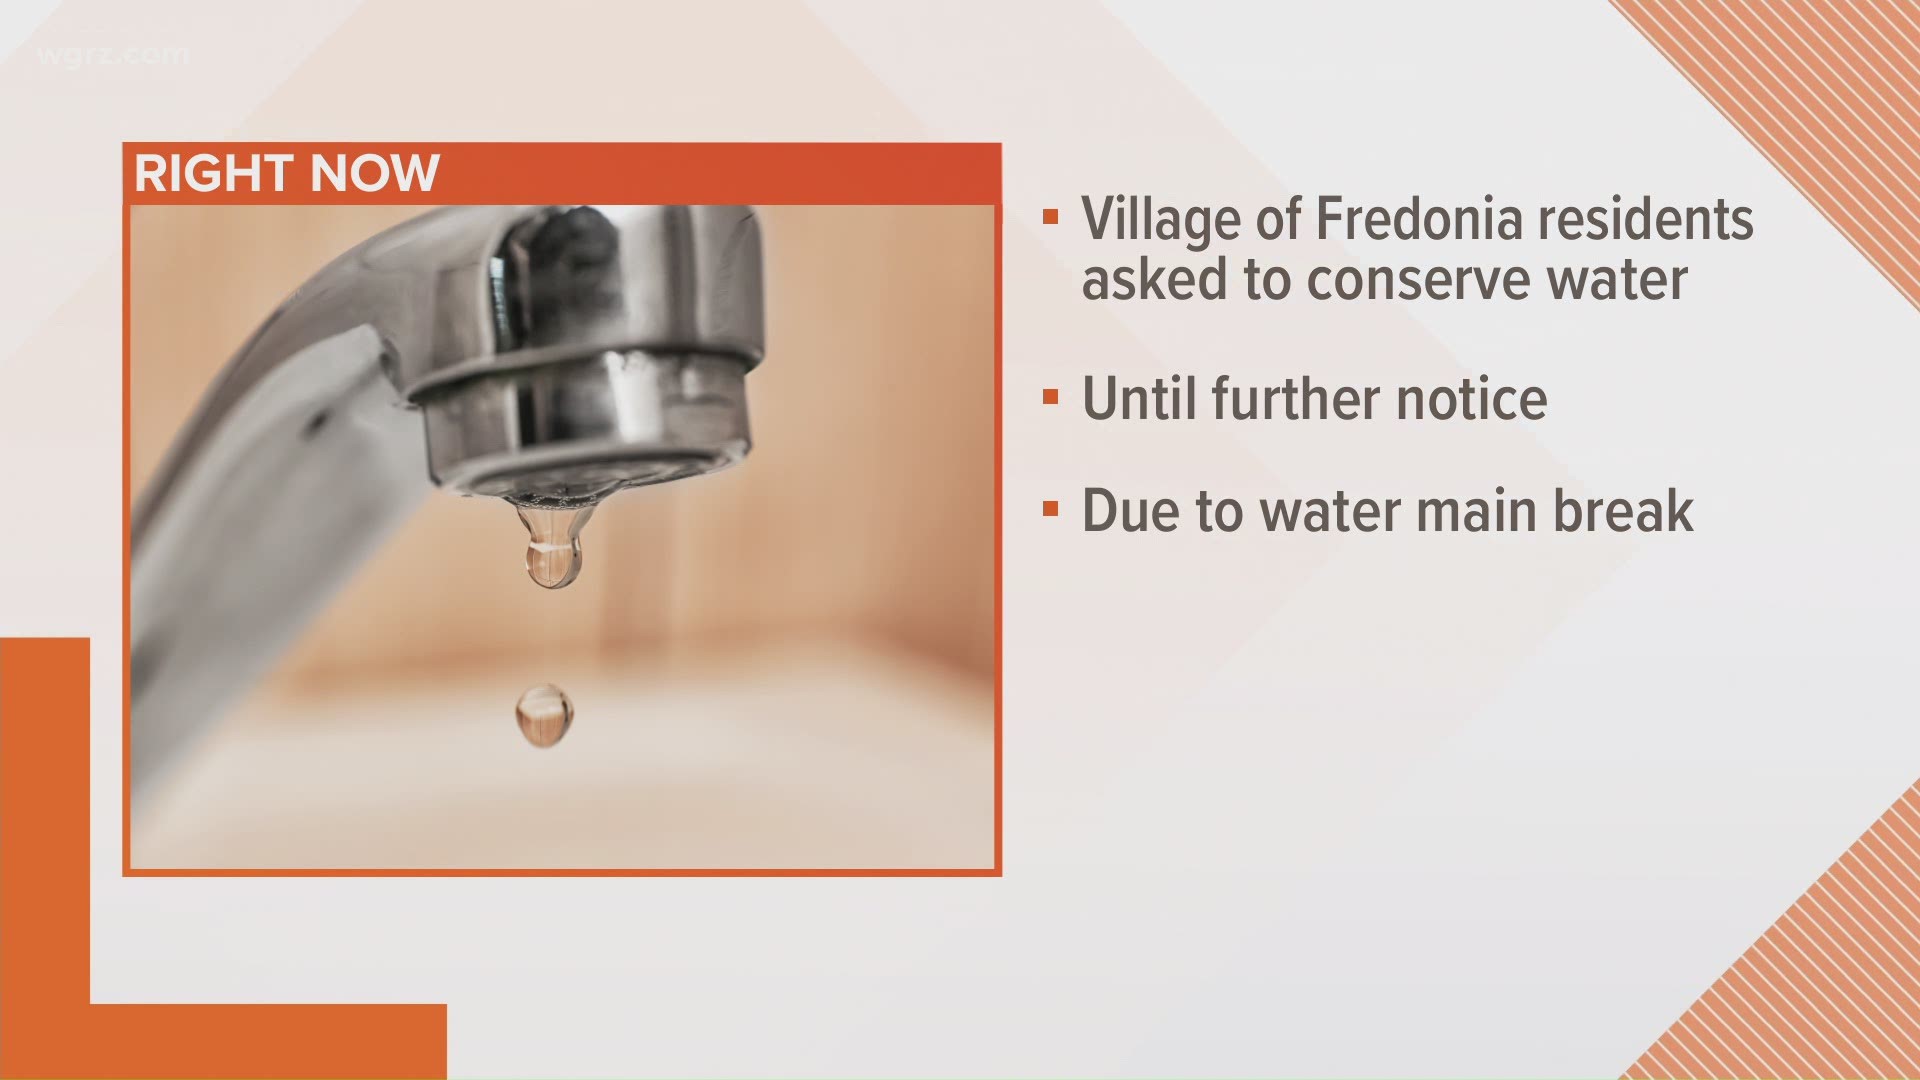 VILLAGE OF FREDONIA ARE STILL BEING ASKED TO CONSERVE WATER UNTIL FURTHER NOTICE.